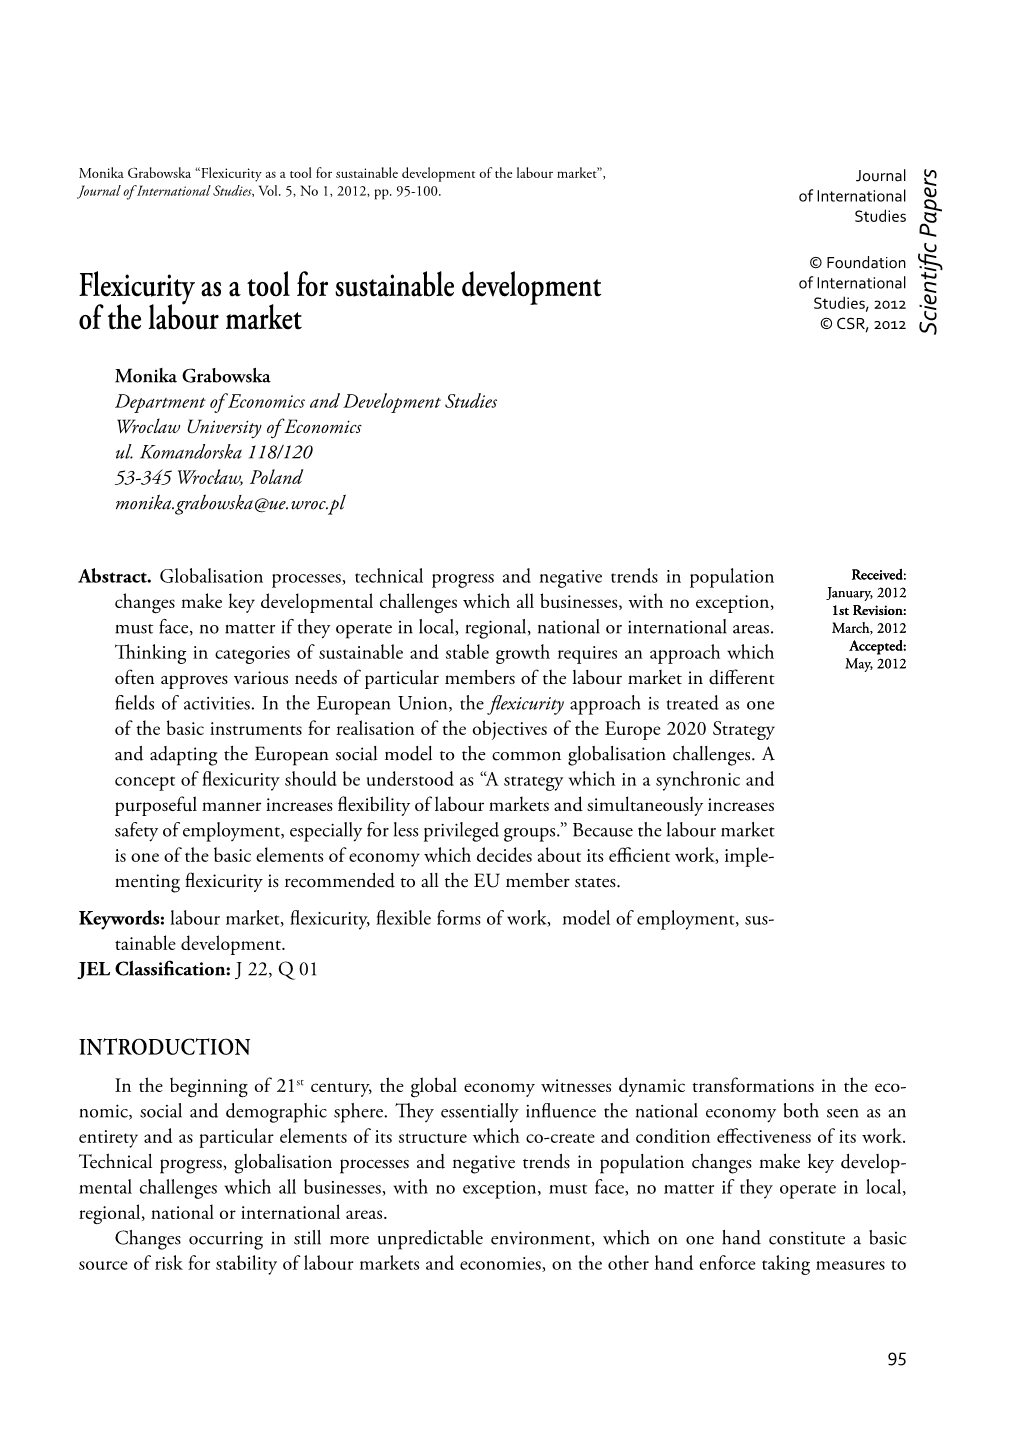 Flexicurity As a Tool for Sustainable Development of the Labour Market”, Journal Journal of International Studies, Vol